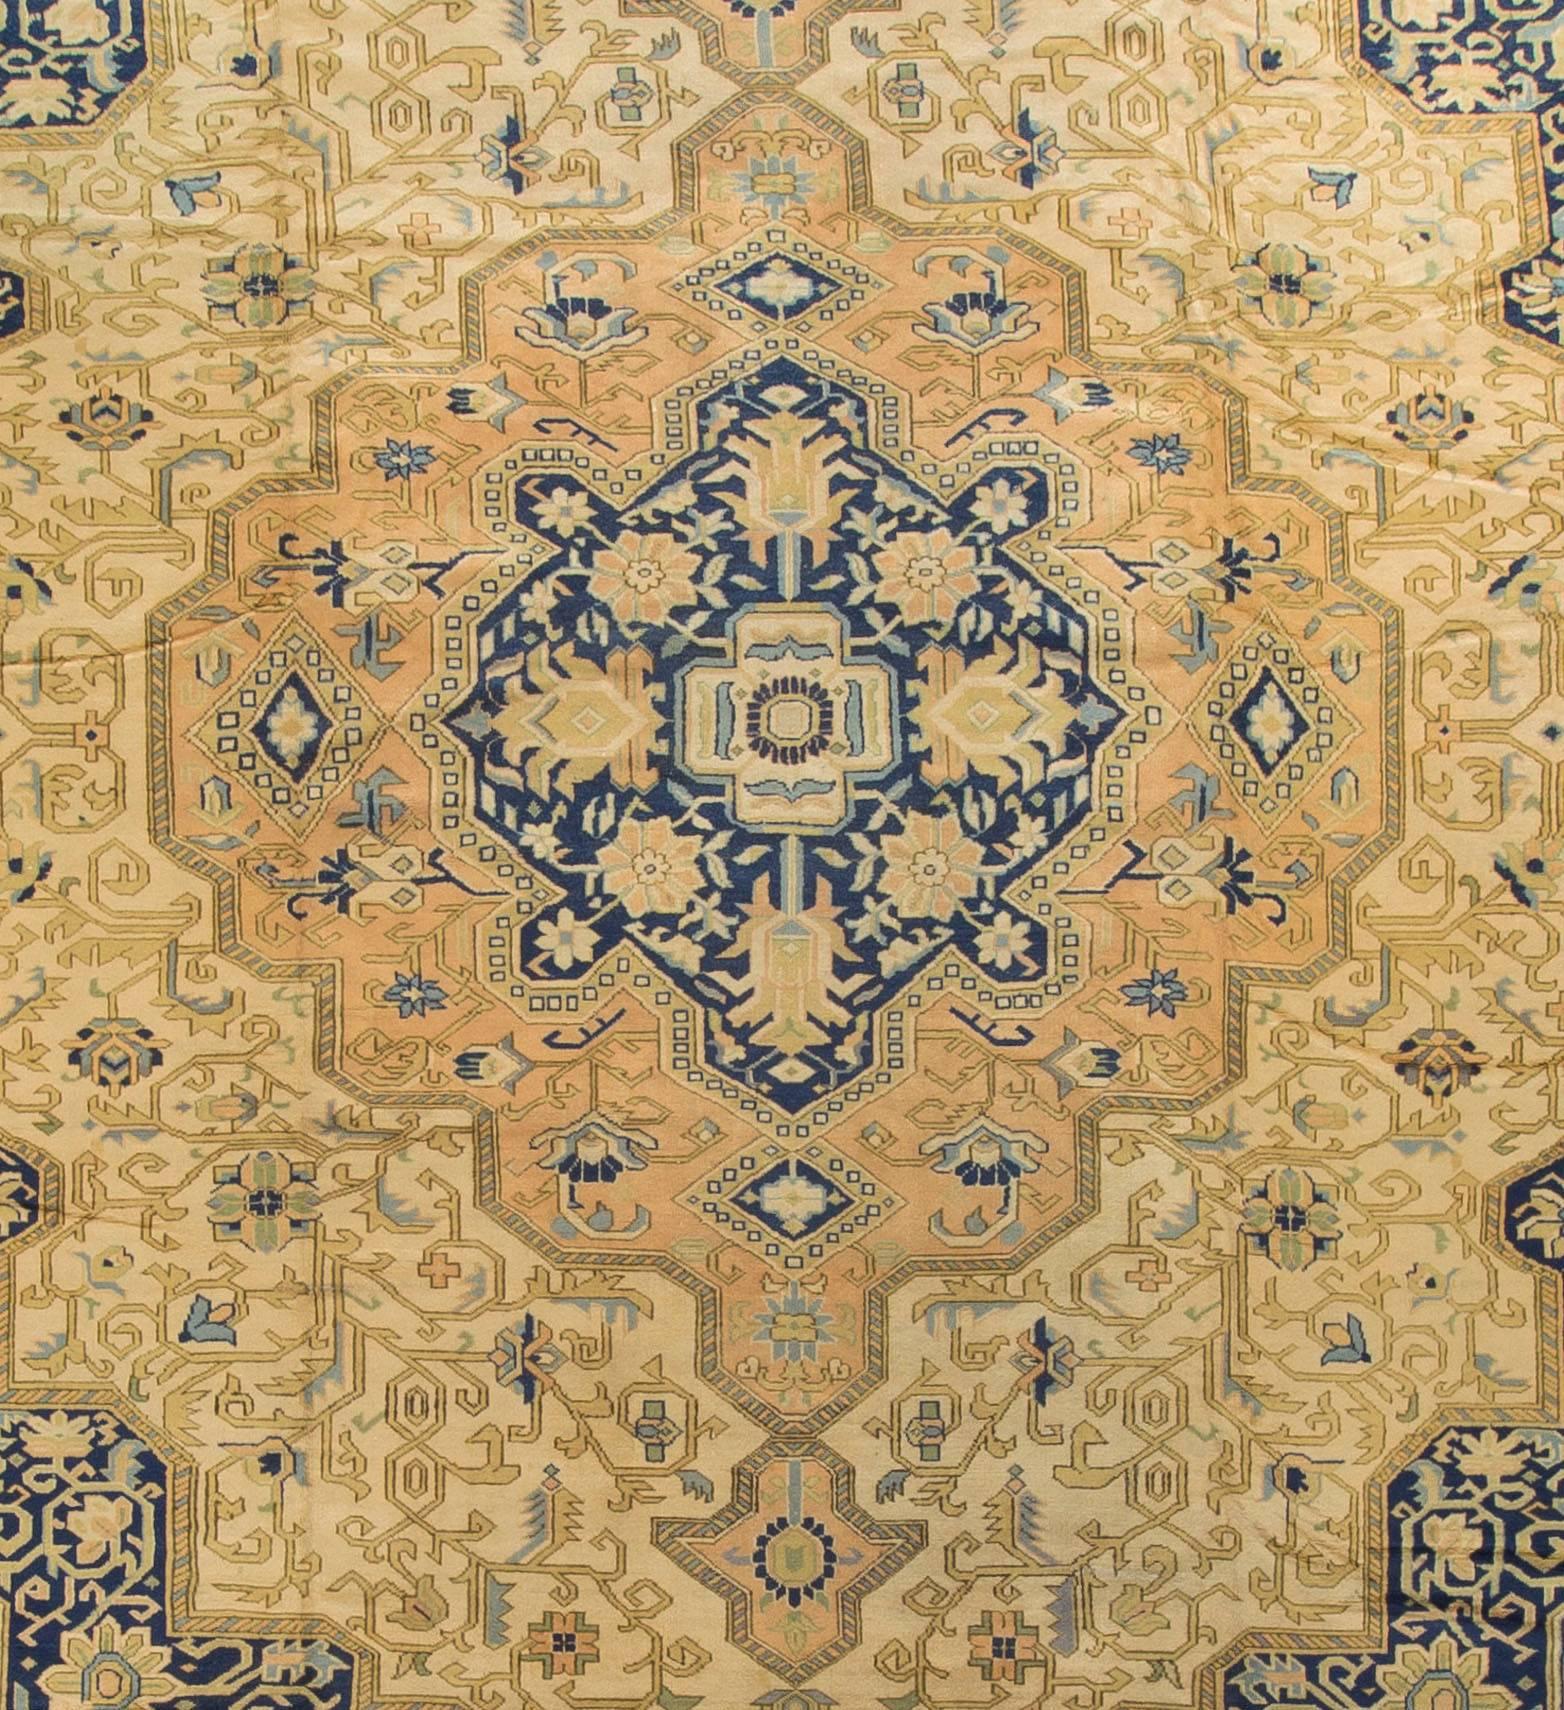 A lovely antique Tabriz circa 1900 rug with the design so typical of this area. The three layered medallion has an arabesque edging and is filled with various palmettes, curved leaves and scrolling, wiry vines. This activity is continued in the